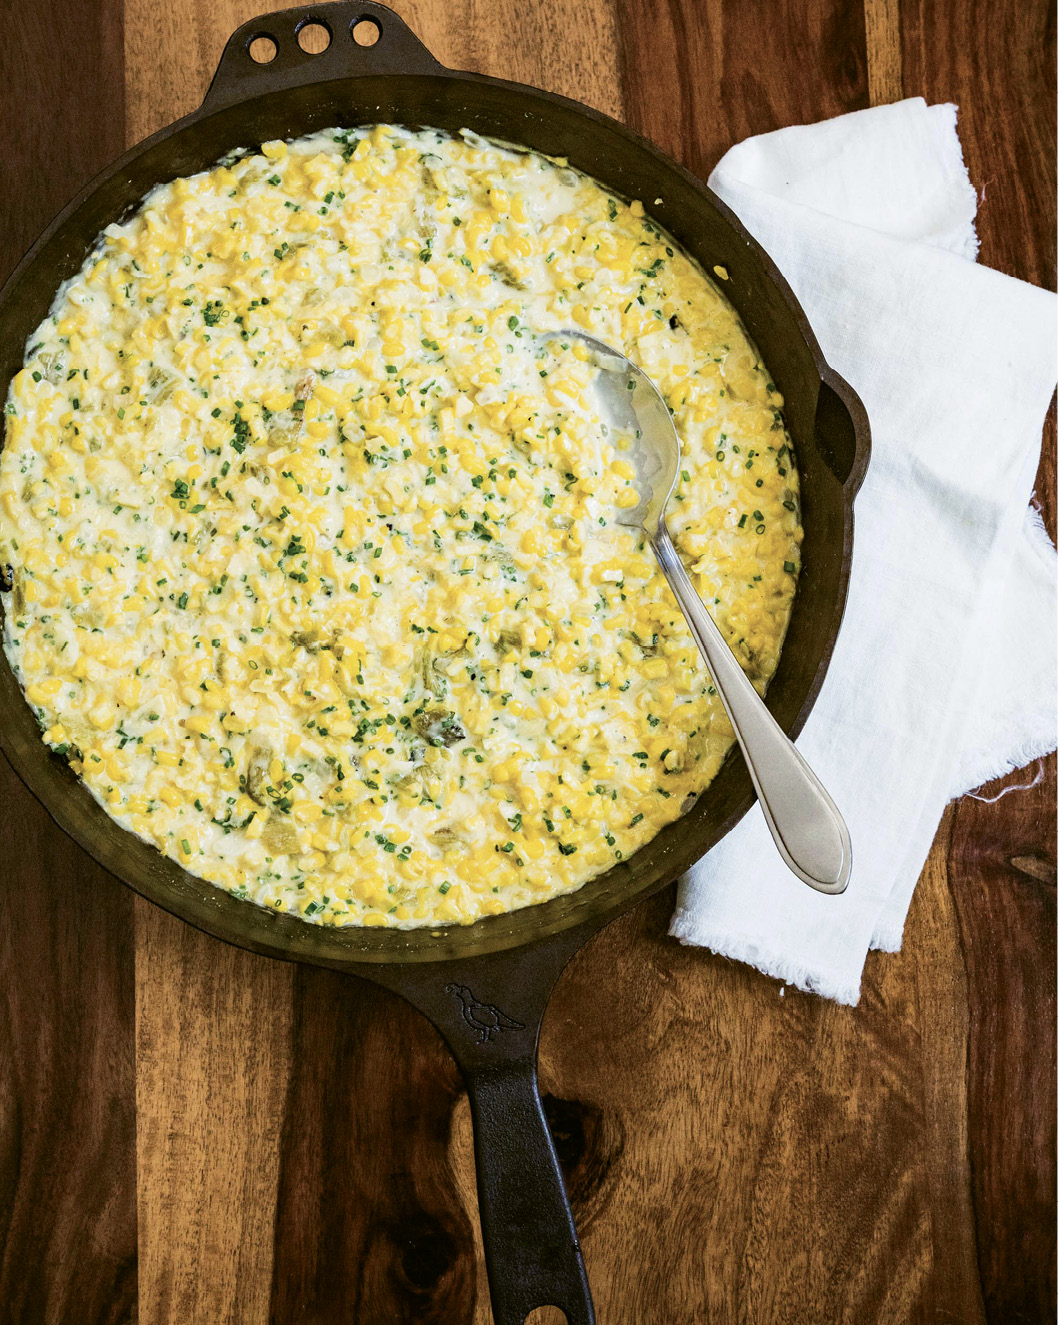 Homemade stock packs extra flavor in chile creamed corn